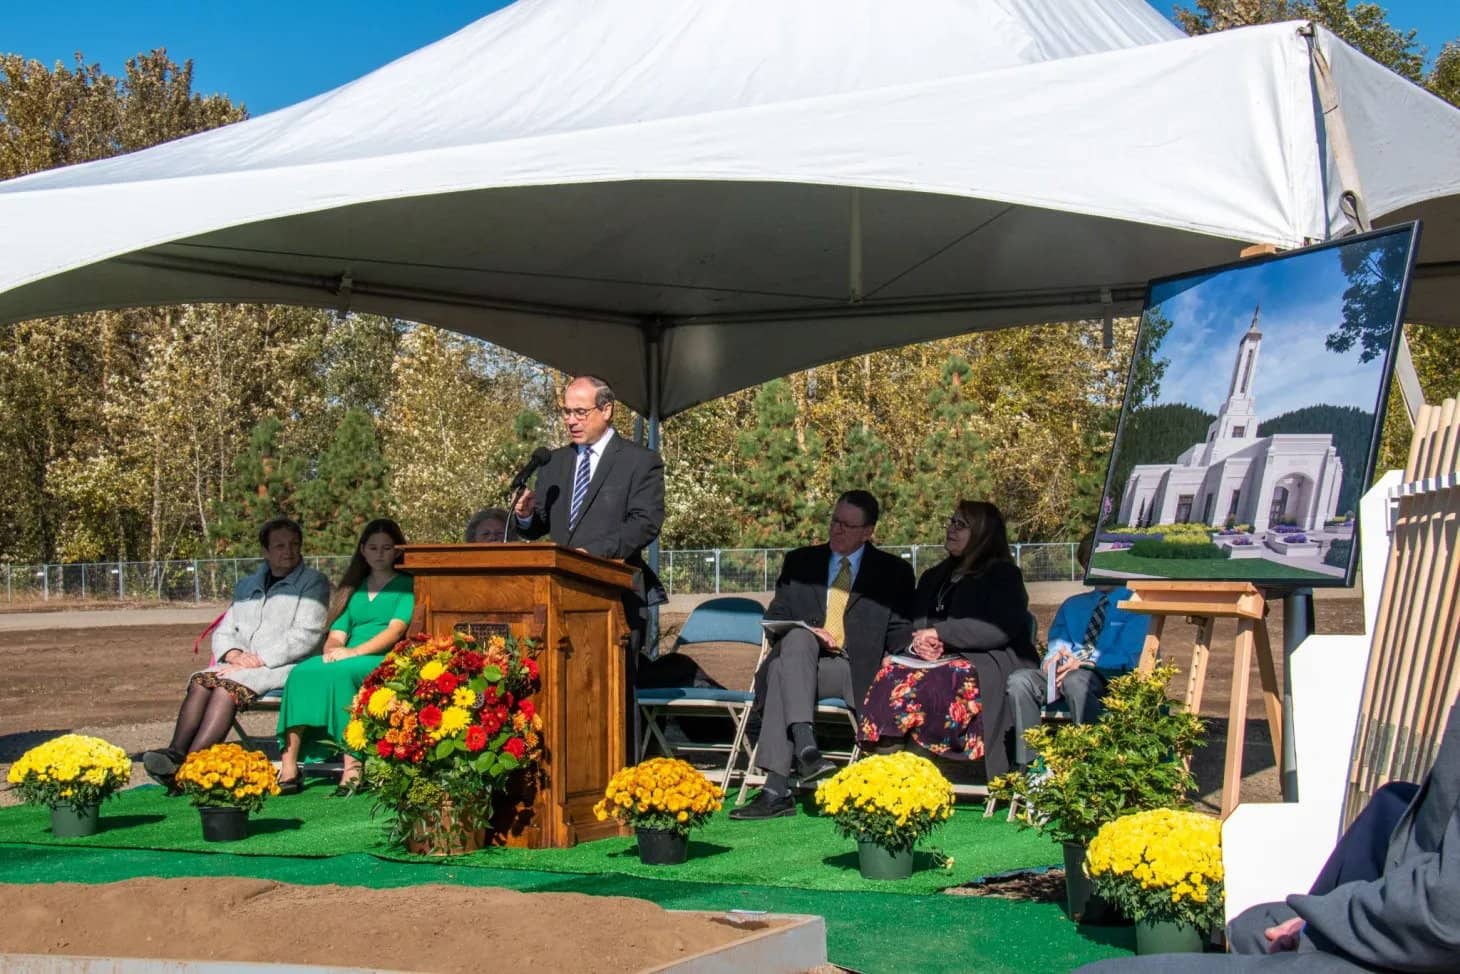 Invited guests participate in the ceremonial groundbreaking of the Willamette Valley Oregon Temple on Saturday, Oct. 29, 2022, in Springfield, Oregon.